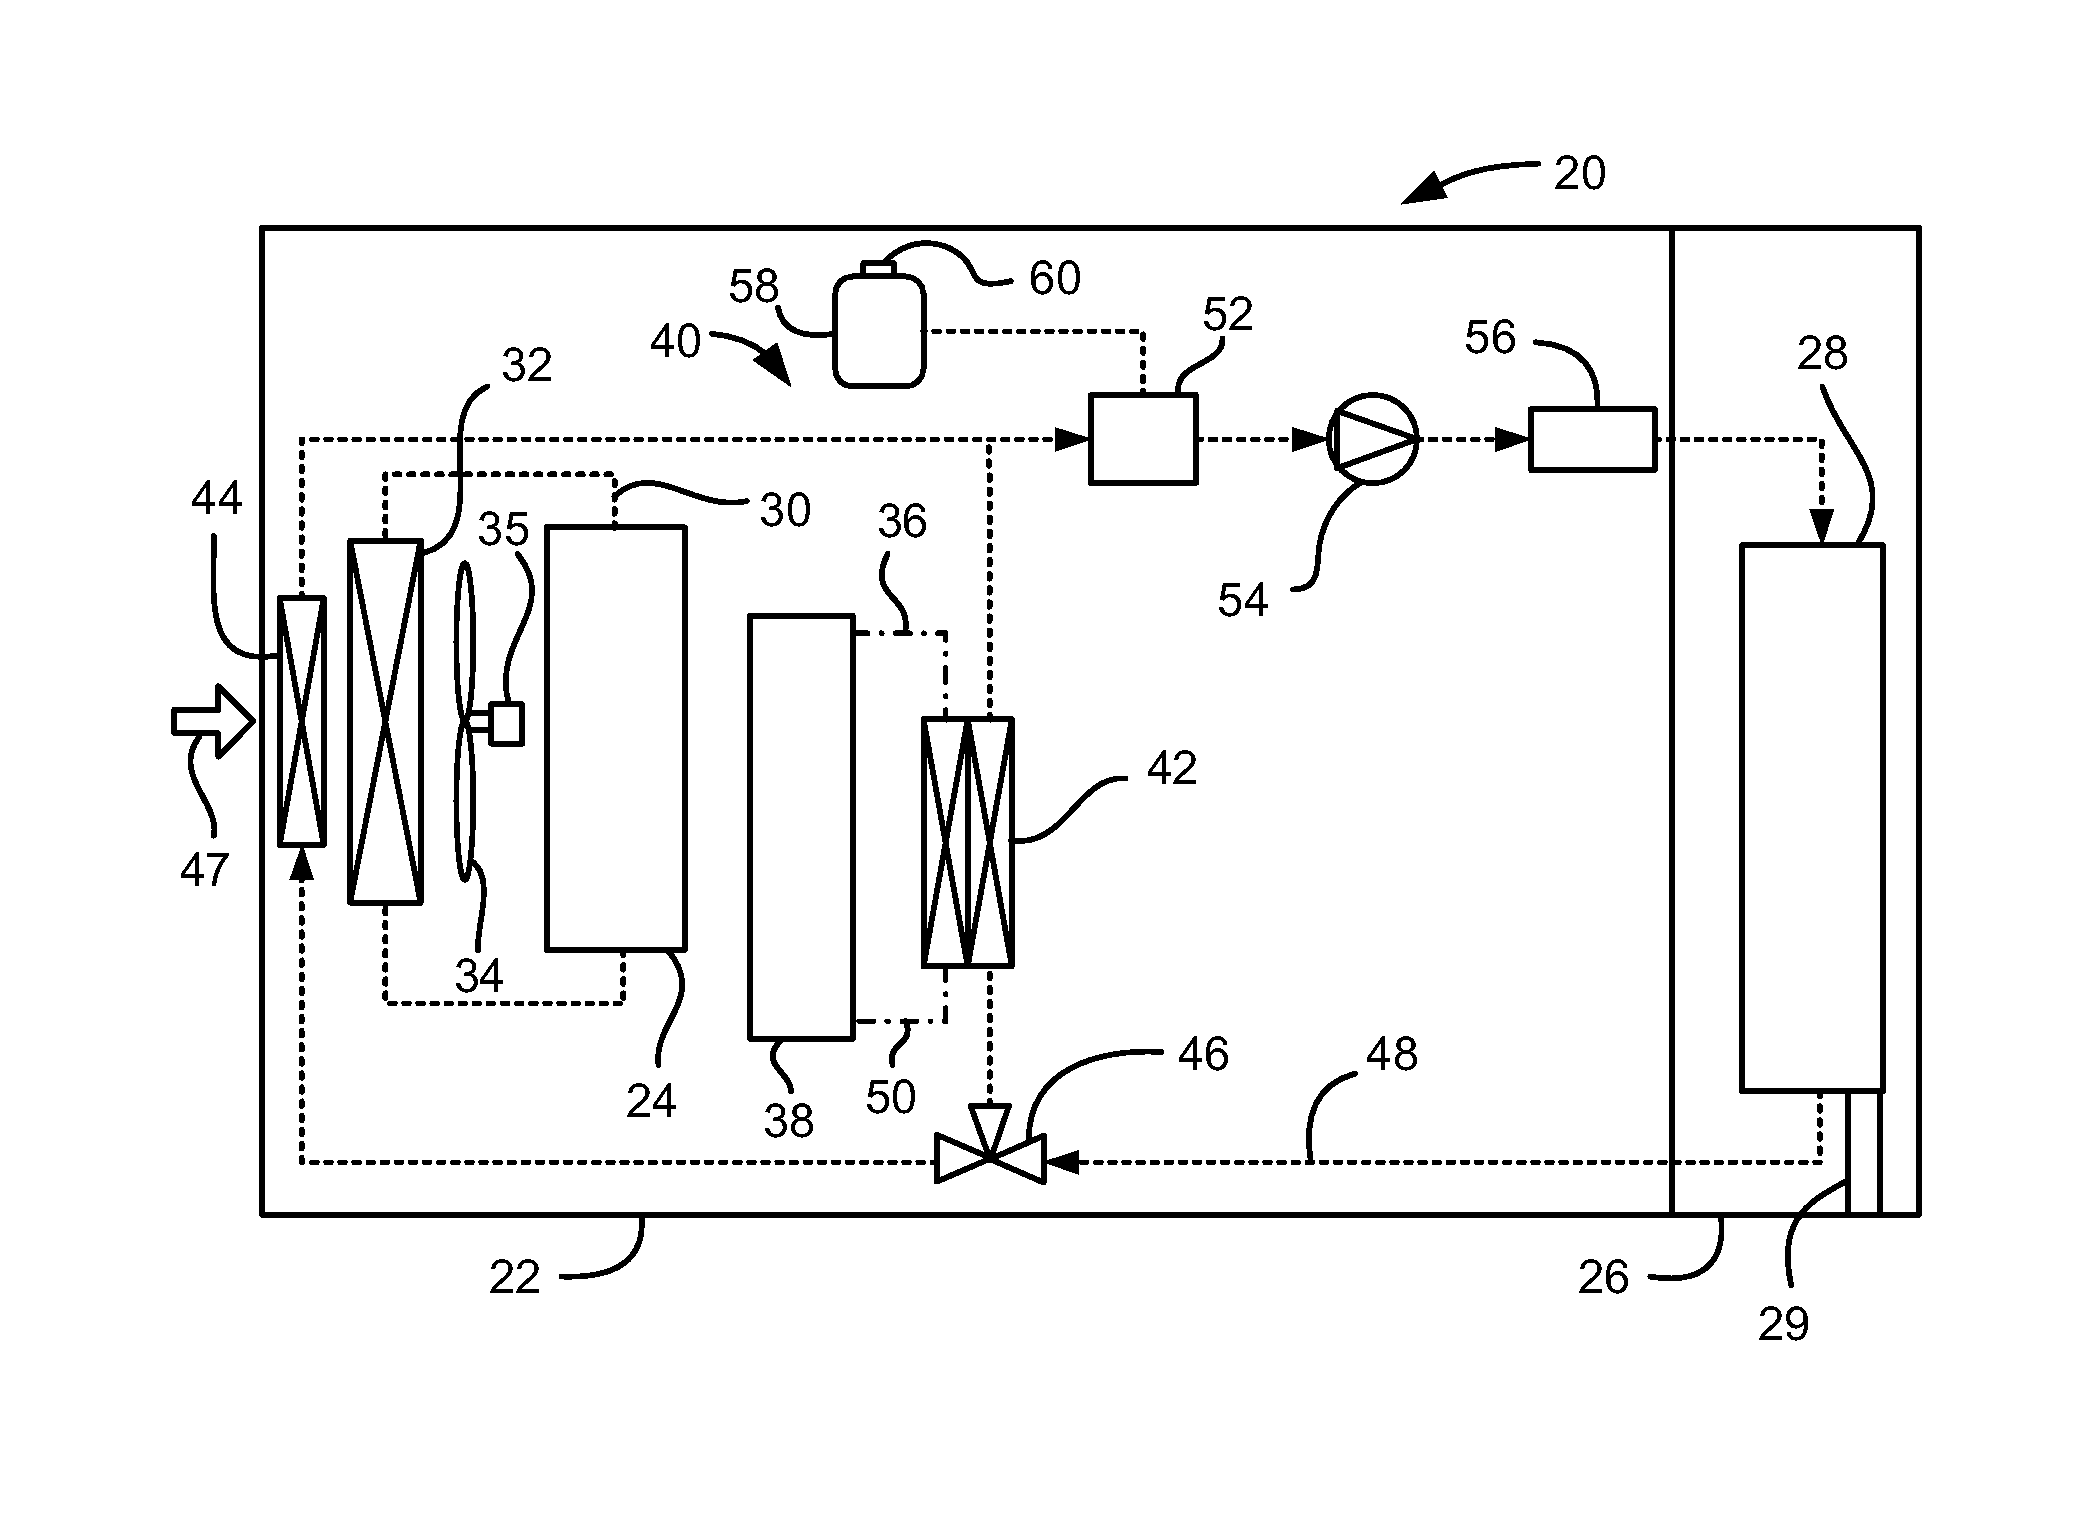 Battery thermal system for vehicle